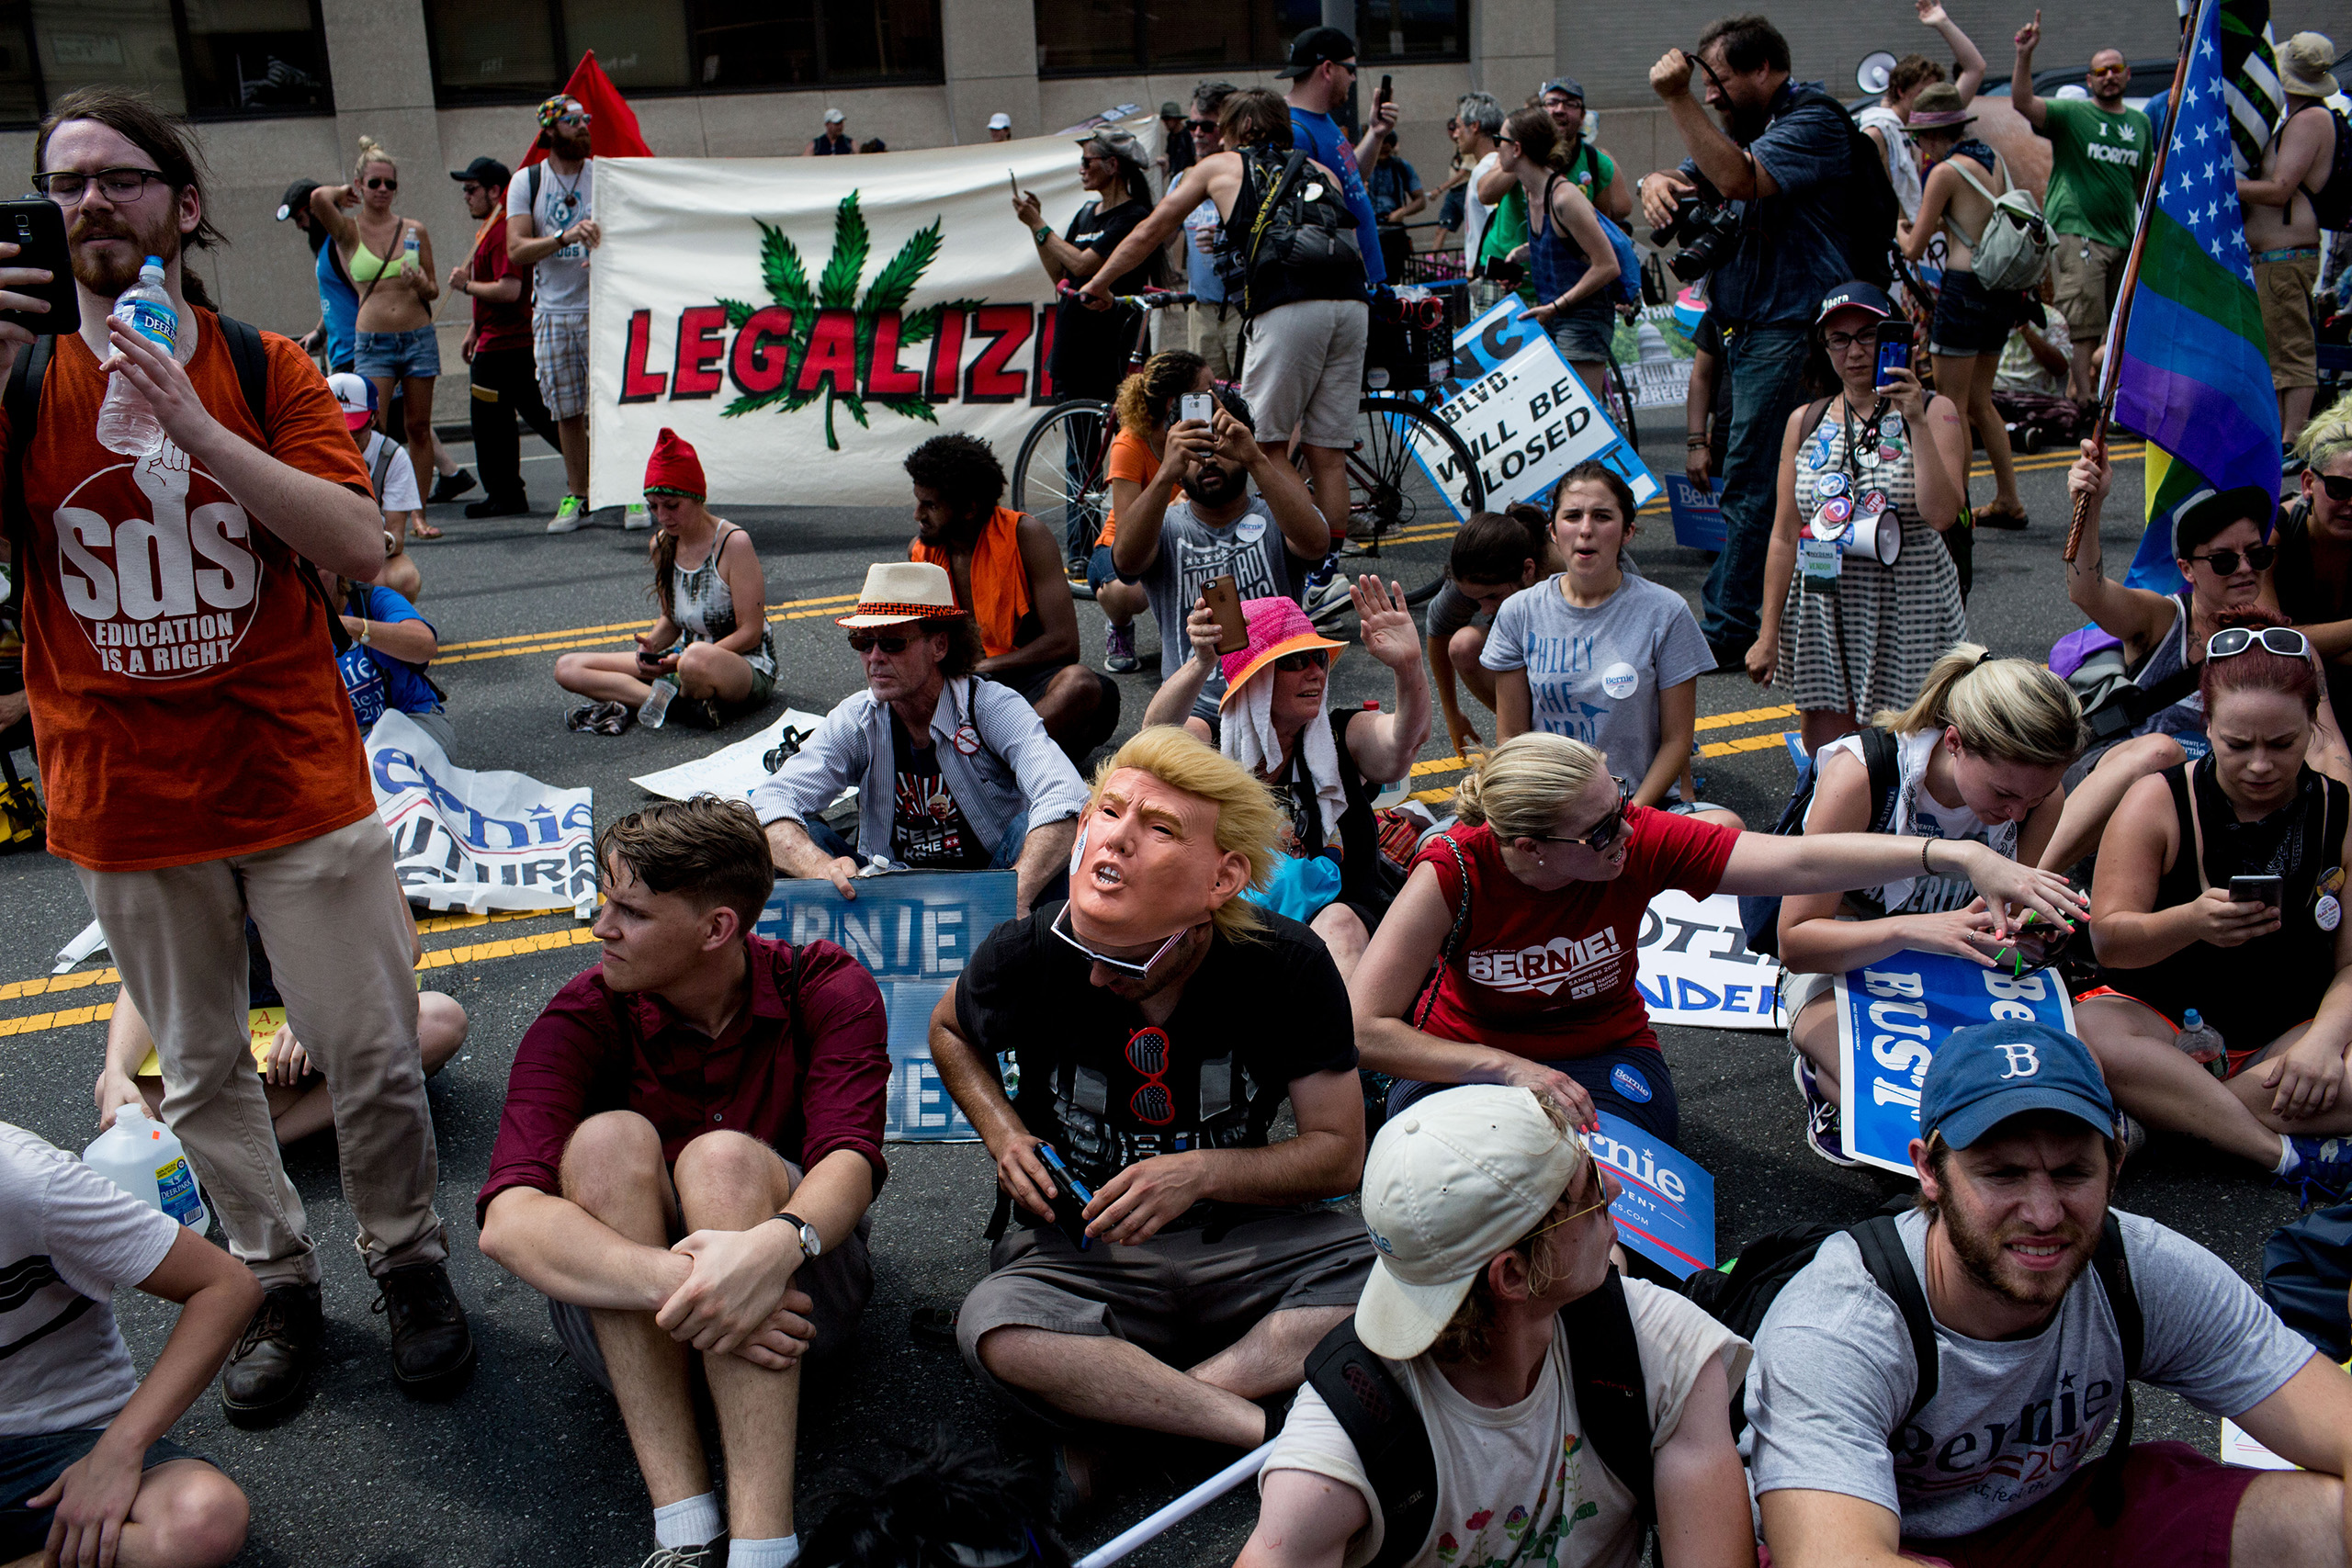 Protesters march from City Hall to the Democratic National Convention at the Wells Fargo Center on July 25, 2016 in Philadelphia, PA.